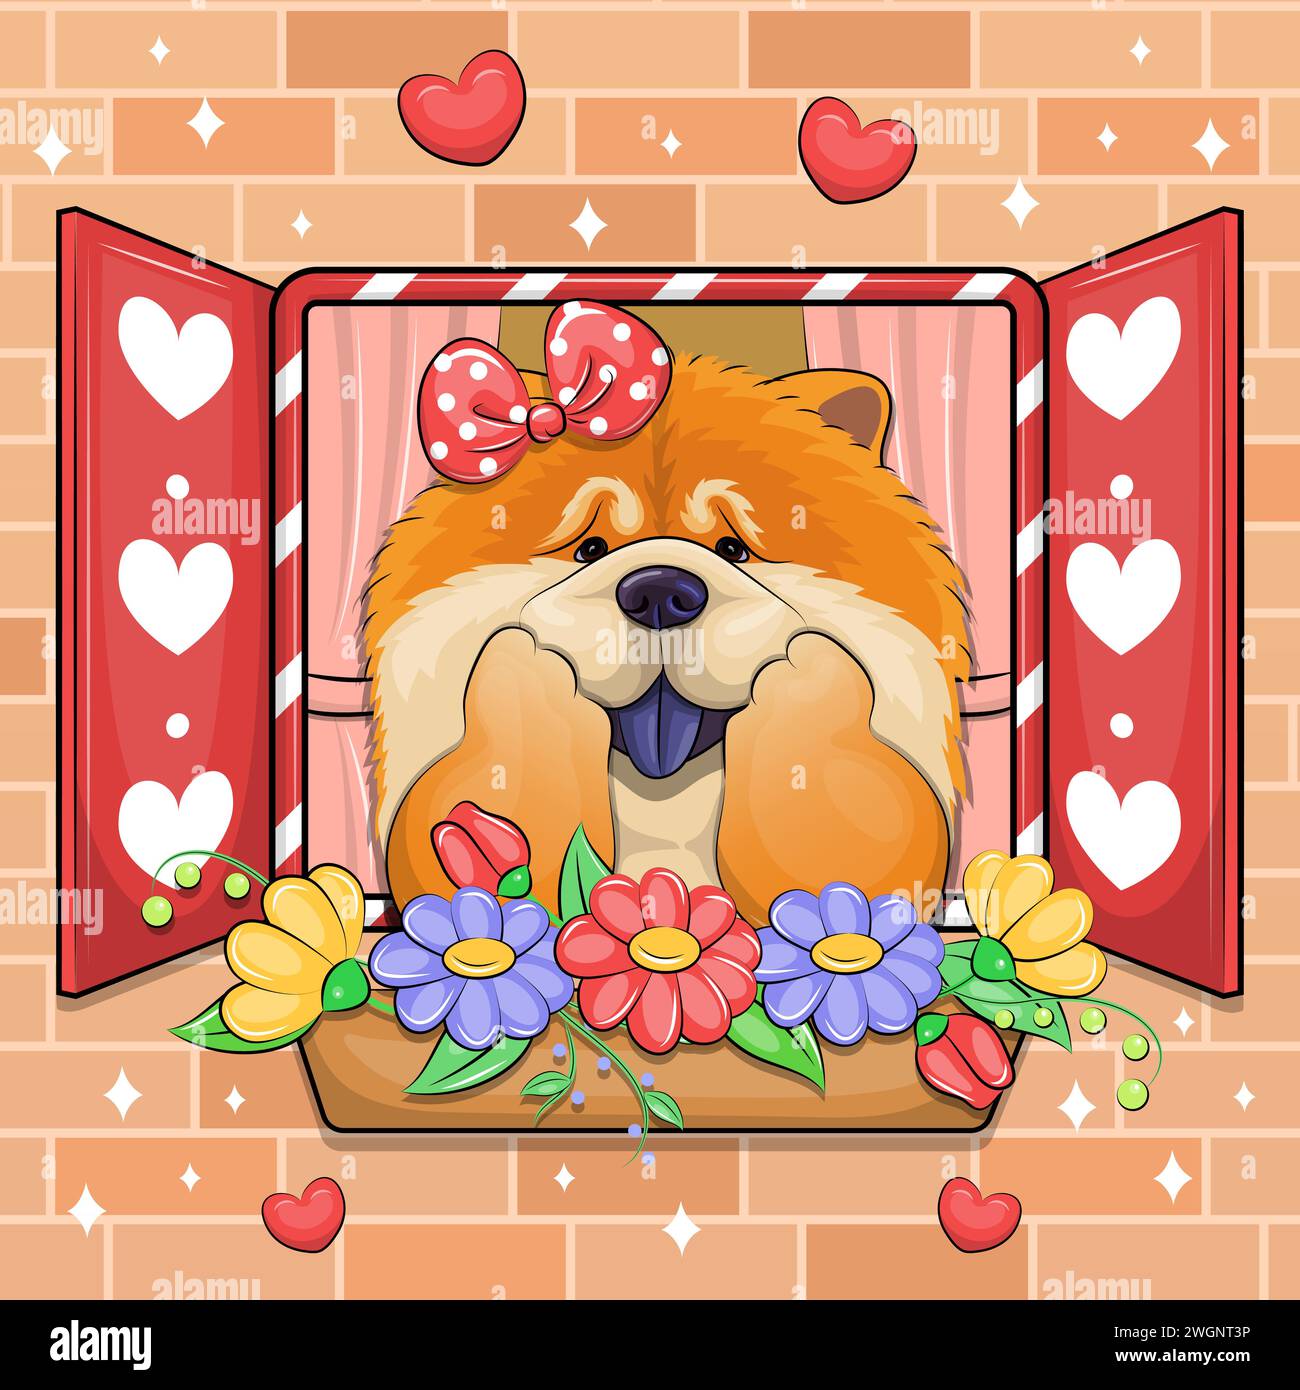 Cute cartoon chow chow dog looks out the window. Vector illustration of an animal with a flower pot, hearts and a window on a brick wall. Stock Vector